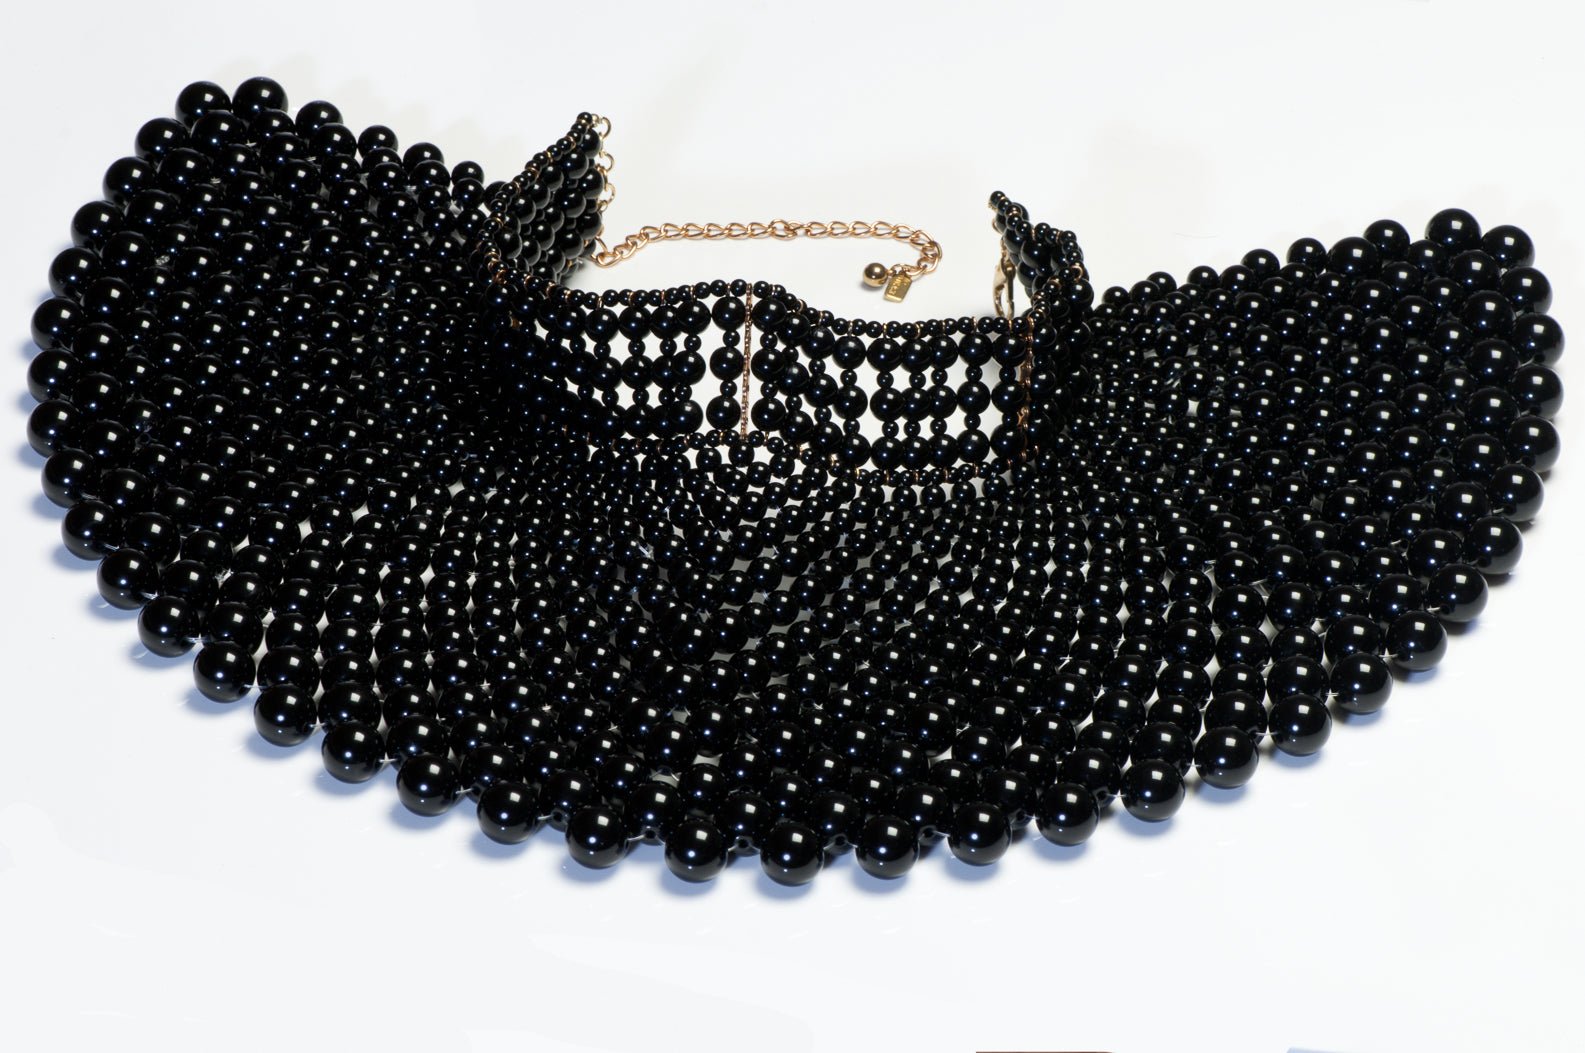 Vintage 1990’s Escada Couture Black Resin Beads Wide Choker Necklace